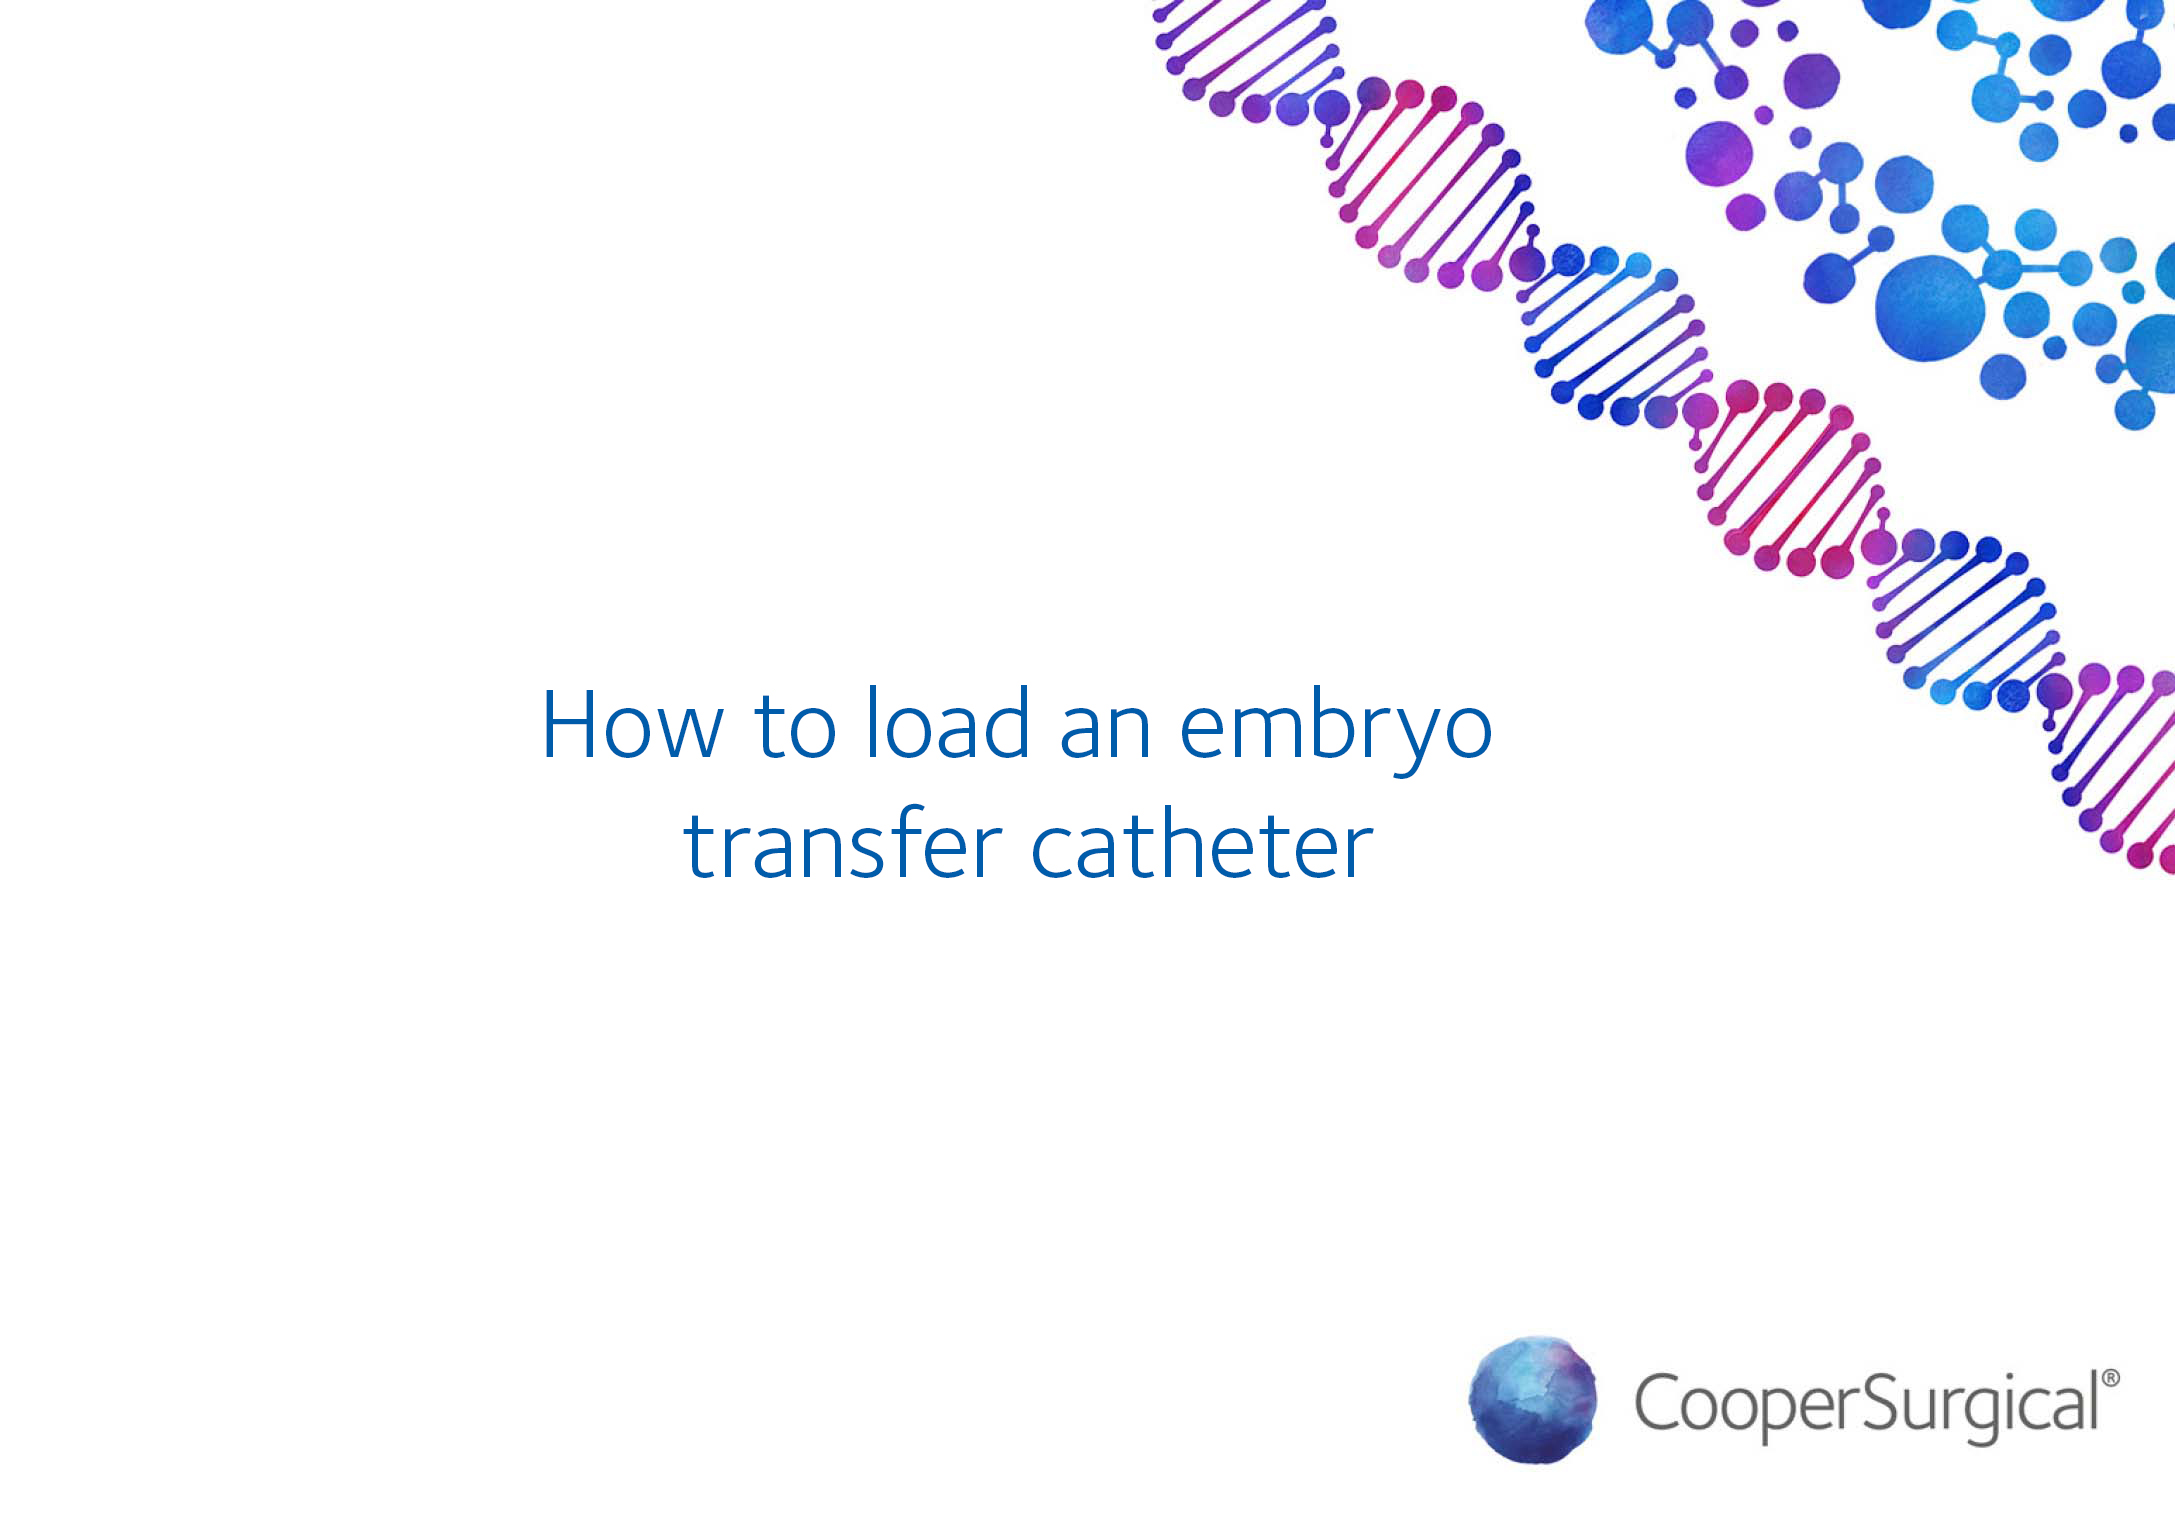 How to load an embryo transfer catheter